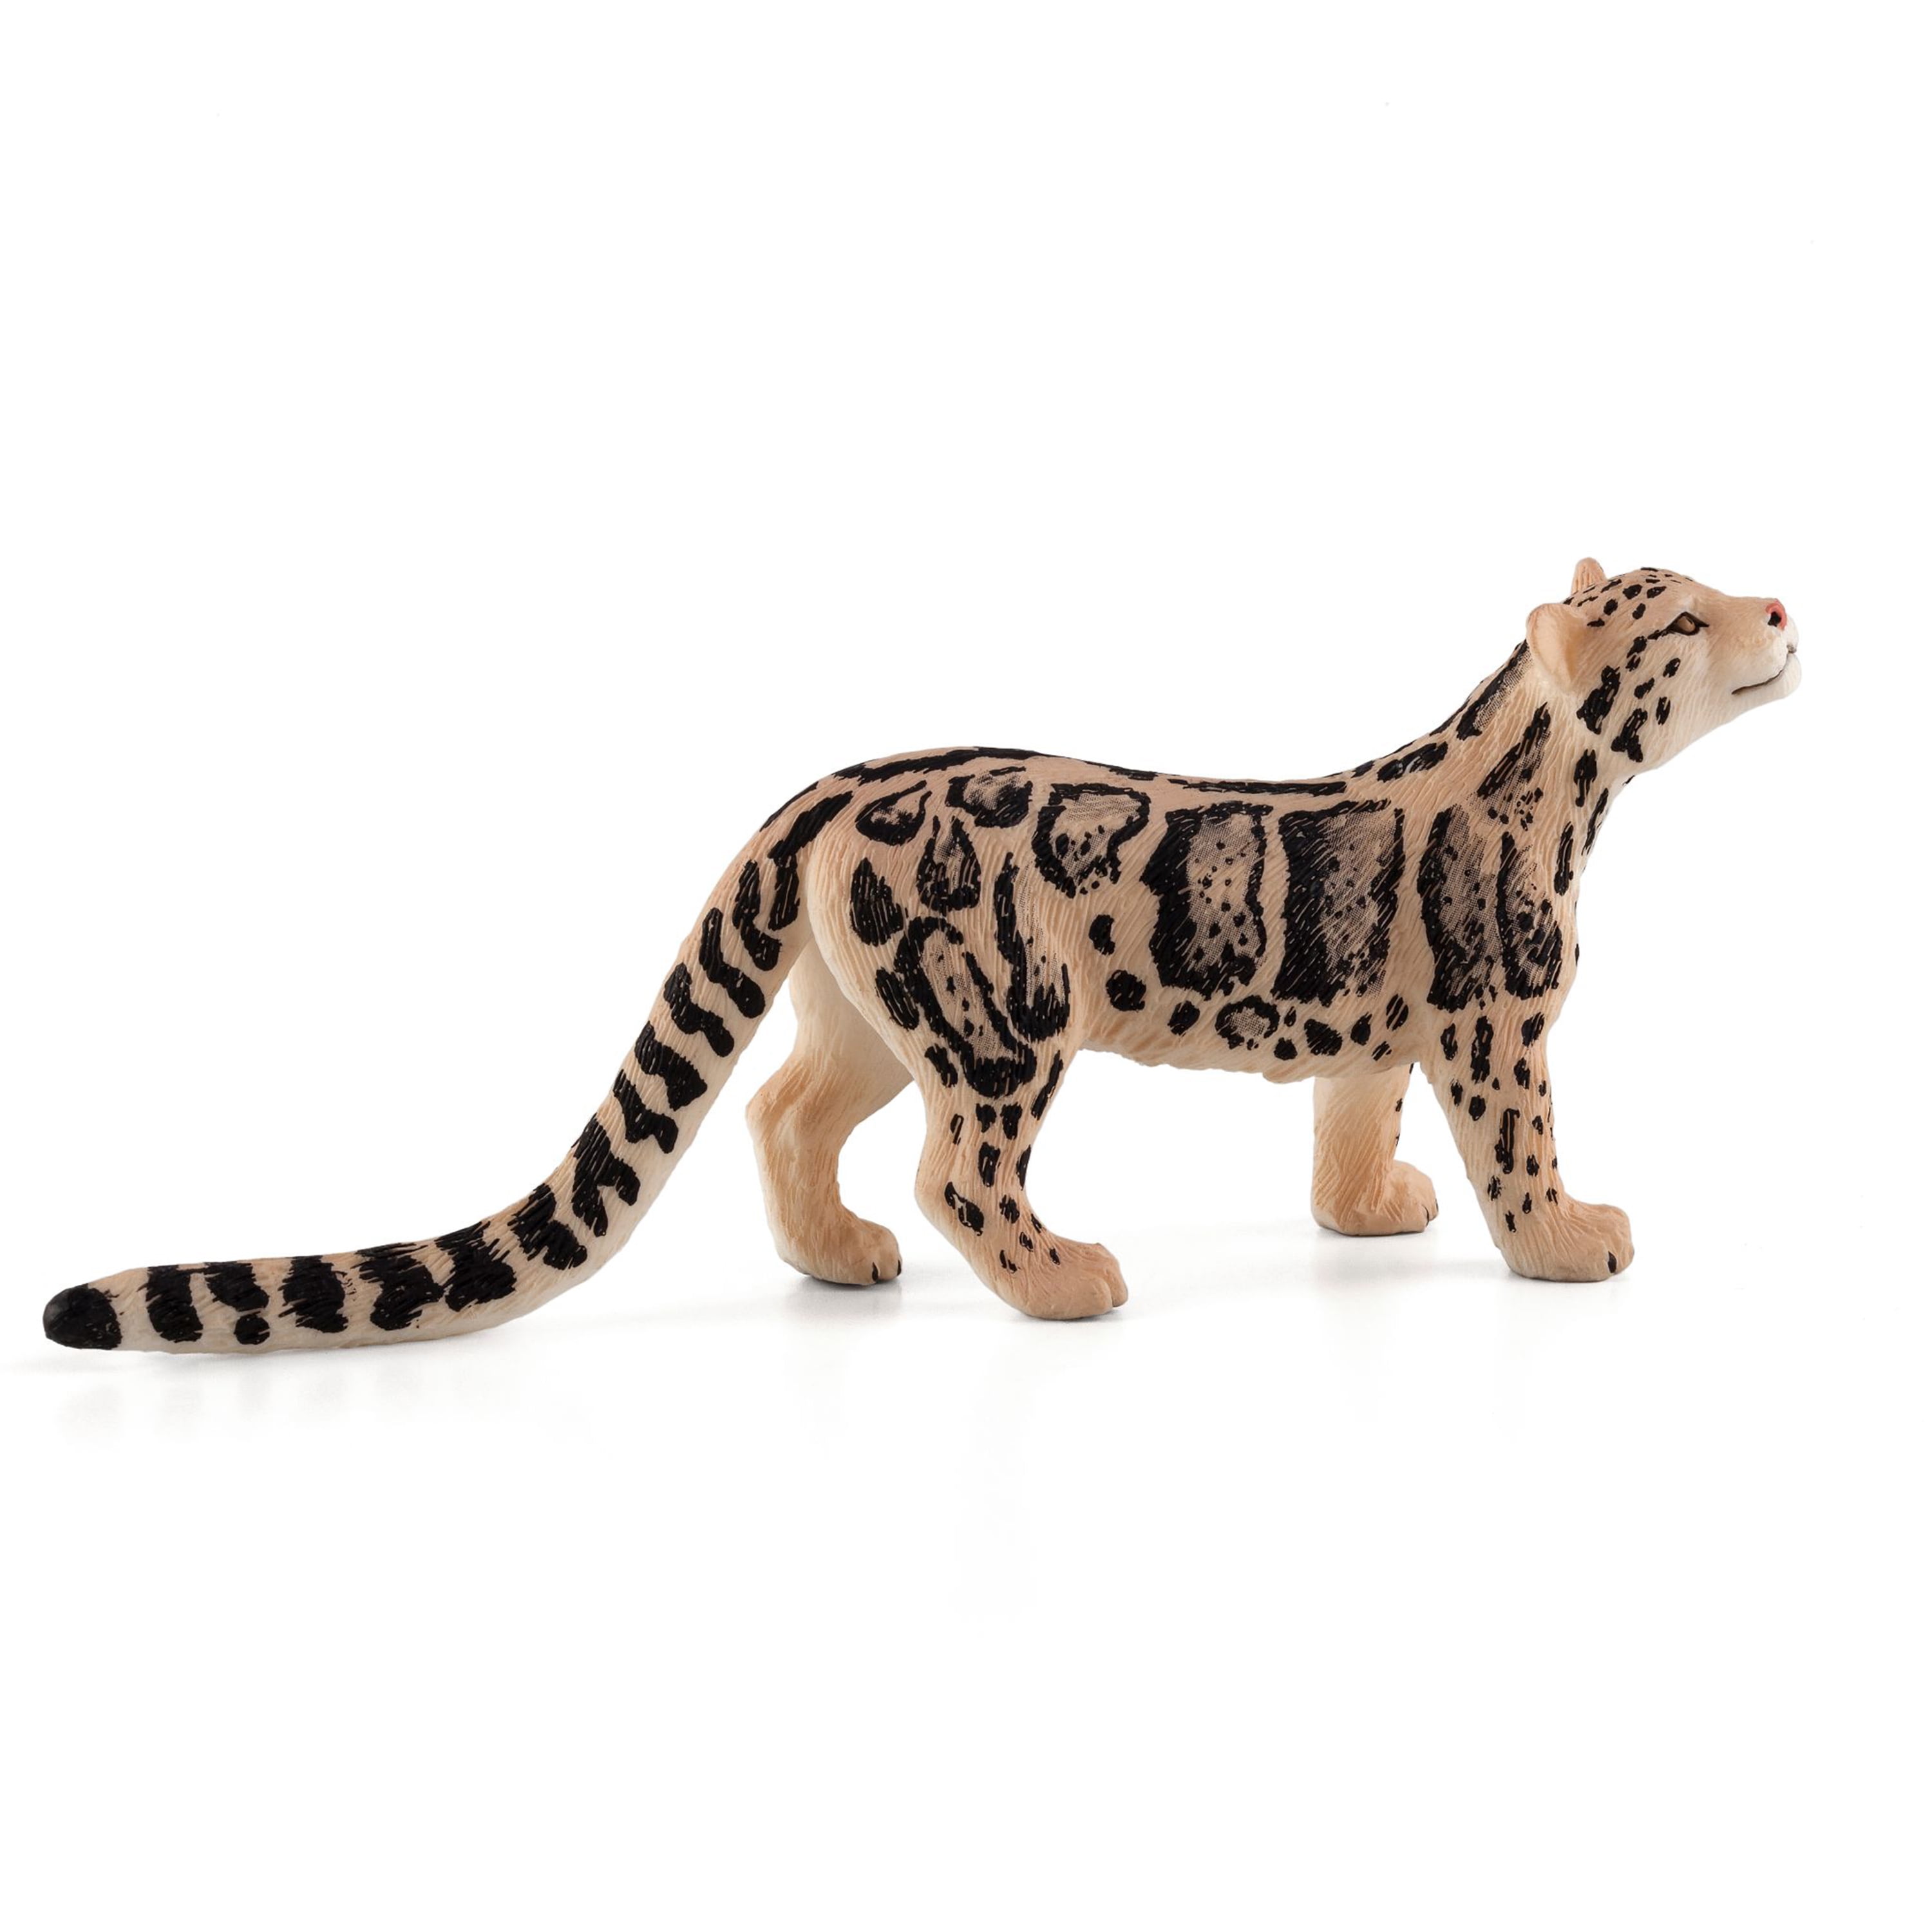 Mojo Cheetah Male Figure Wildlife Toy 387197 for sale online